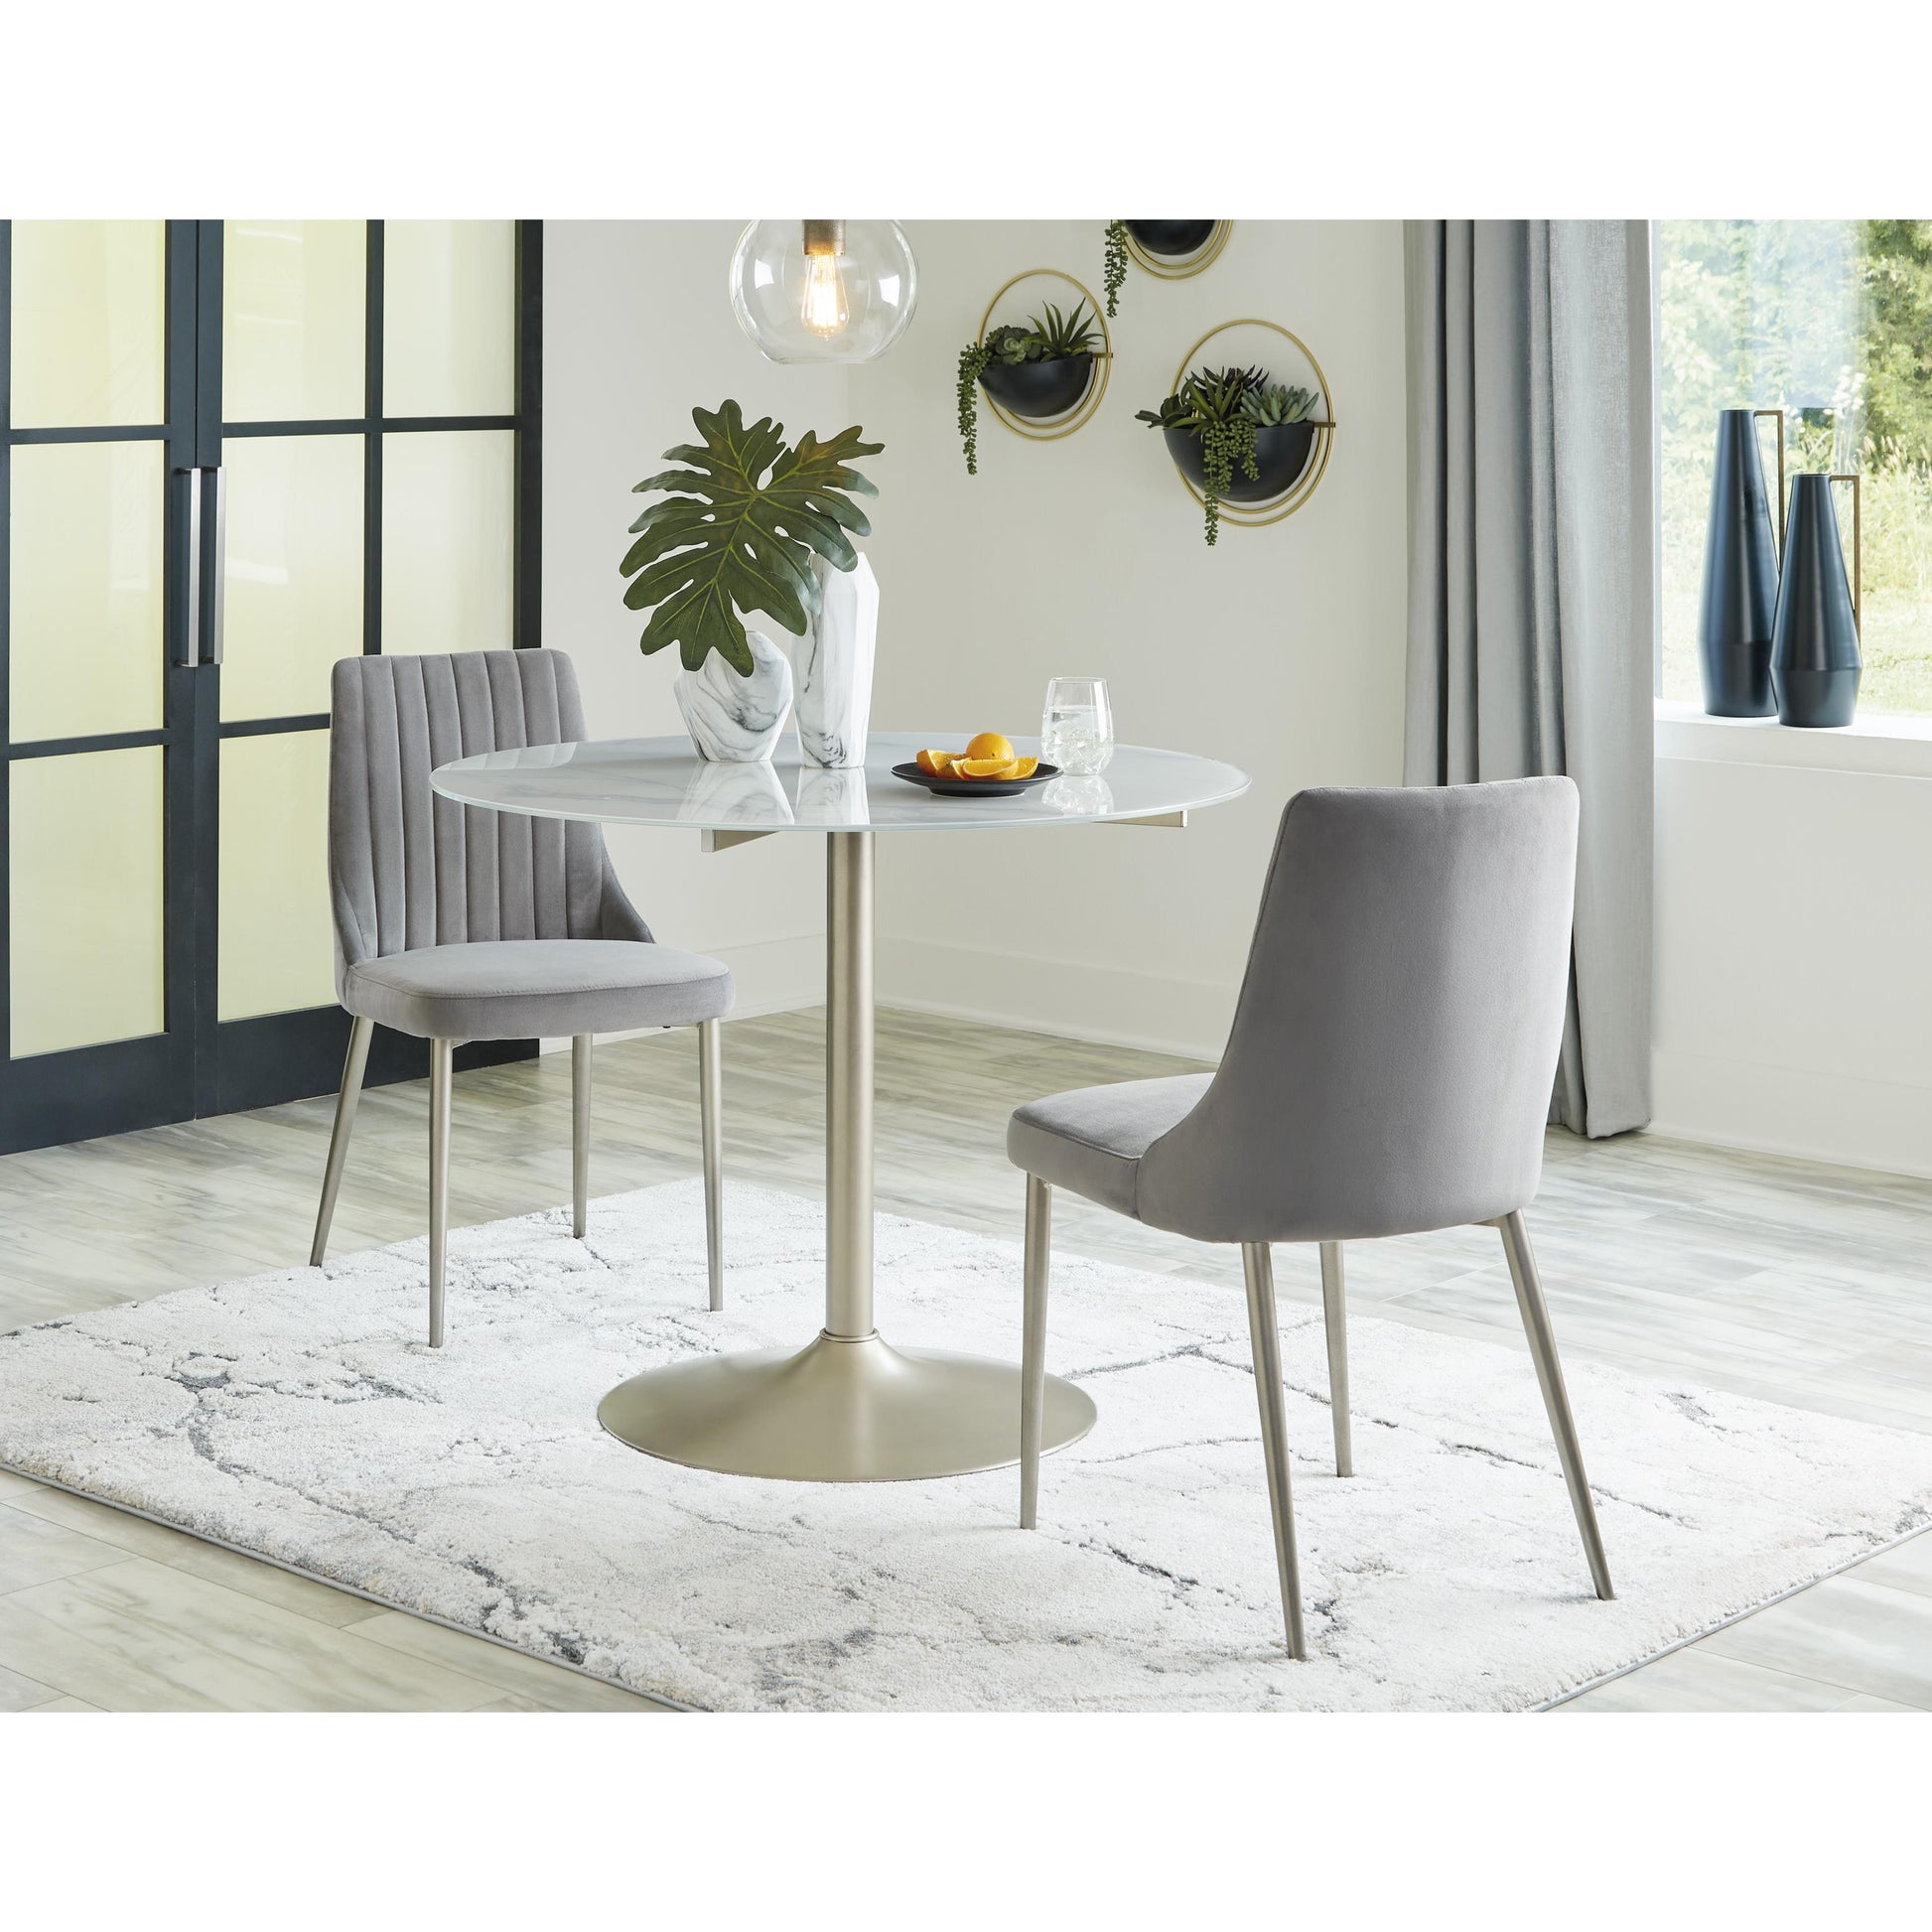 Signature Design by Ashley Barchoni Dining Chair D262-01